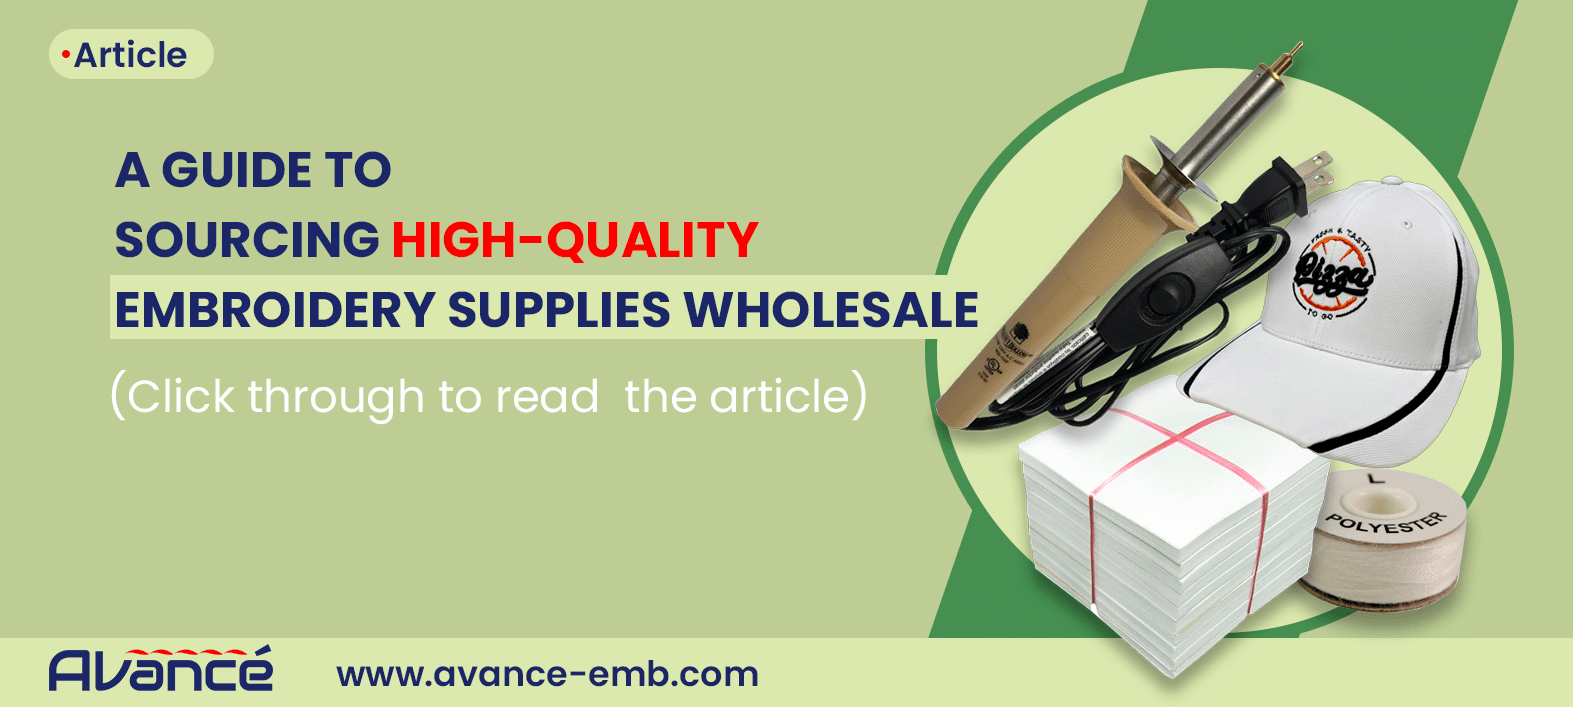 A Guide to Sourcing High-Quality Embroidery Supplies Wholesale